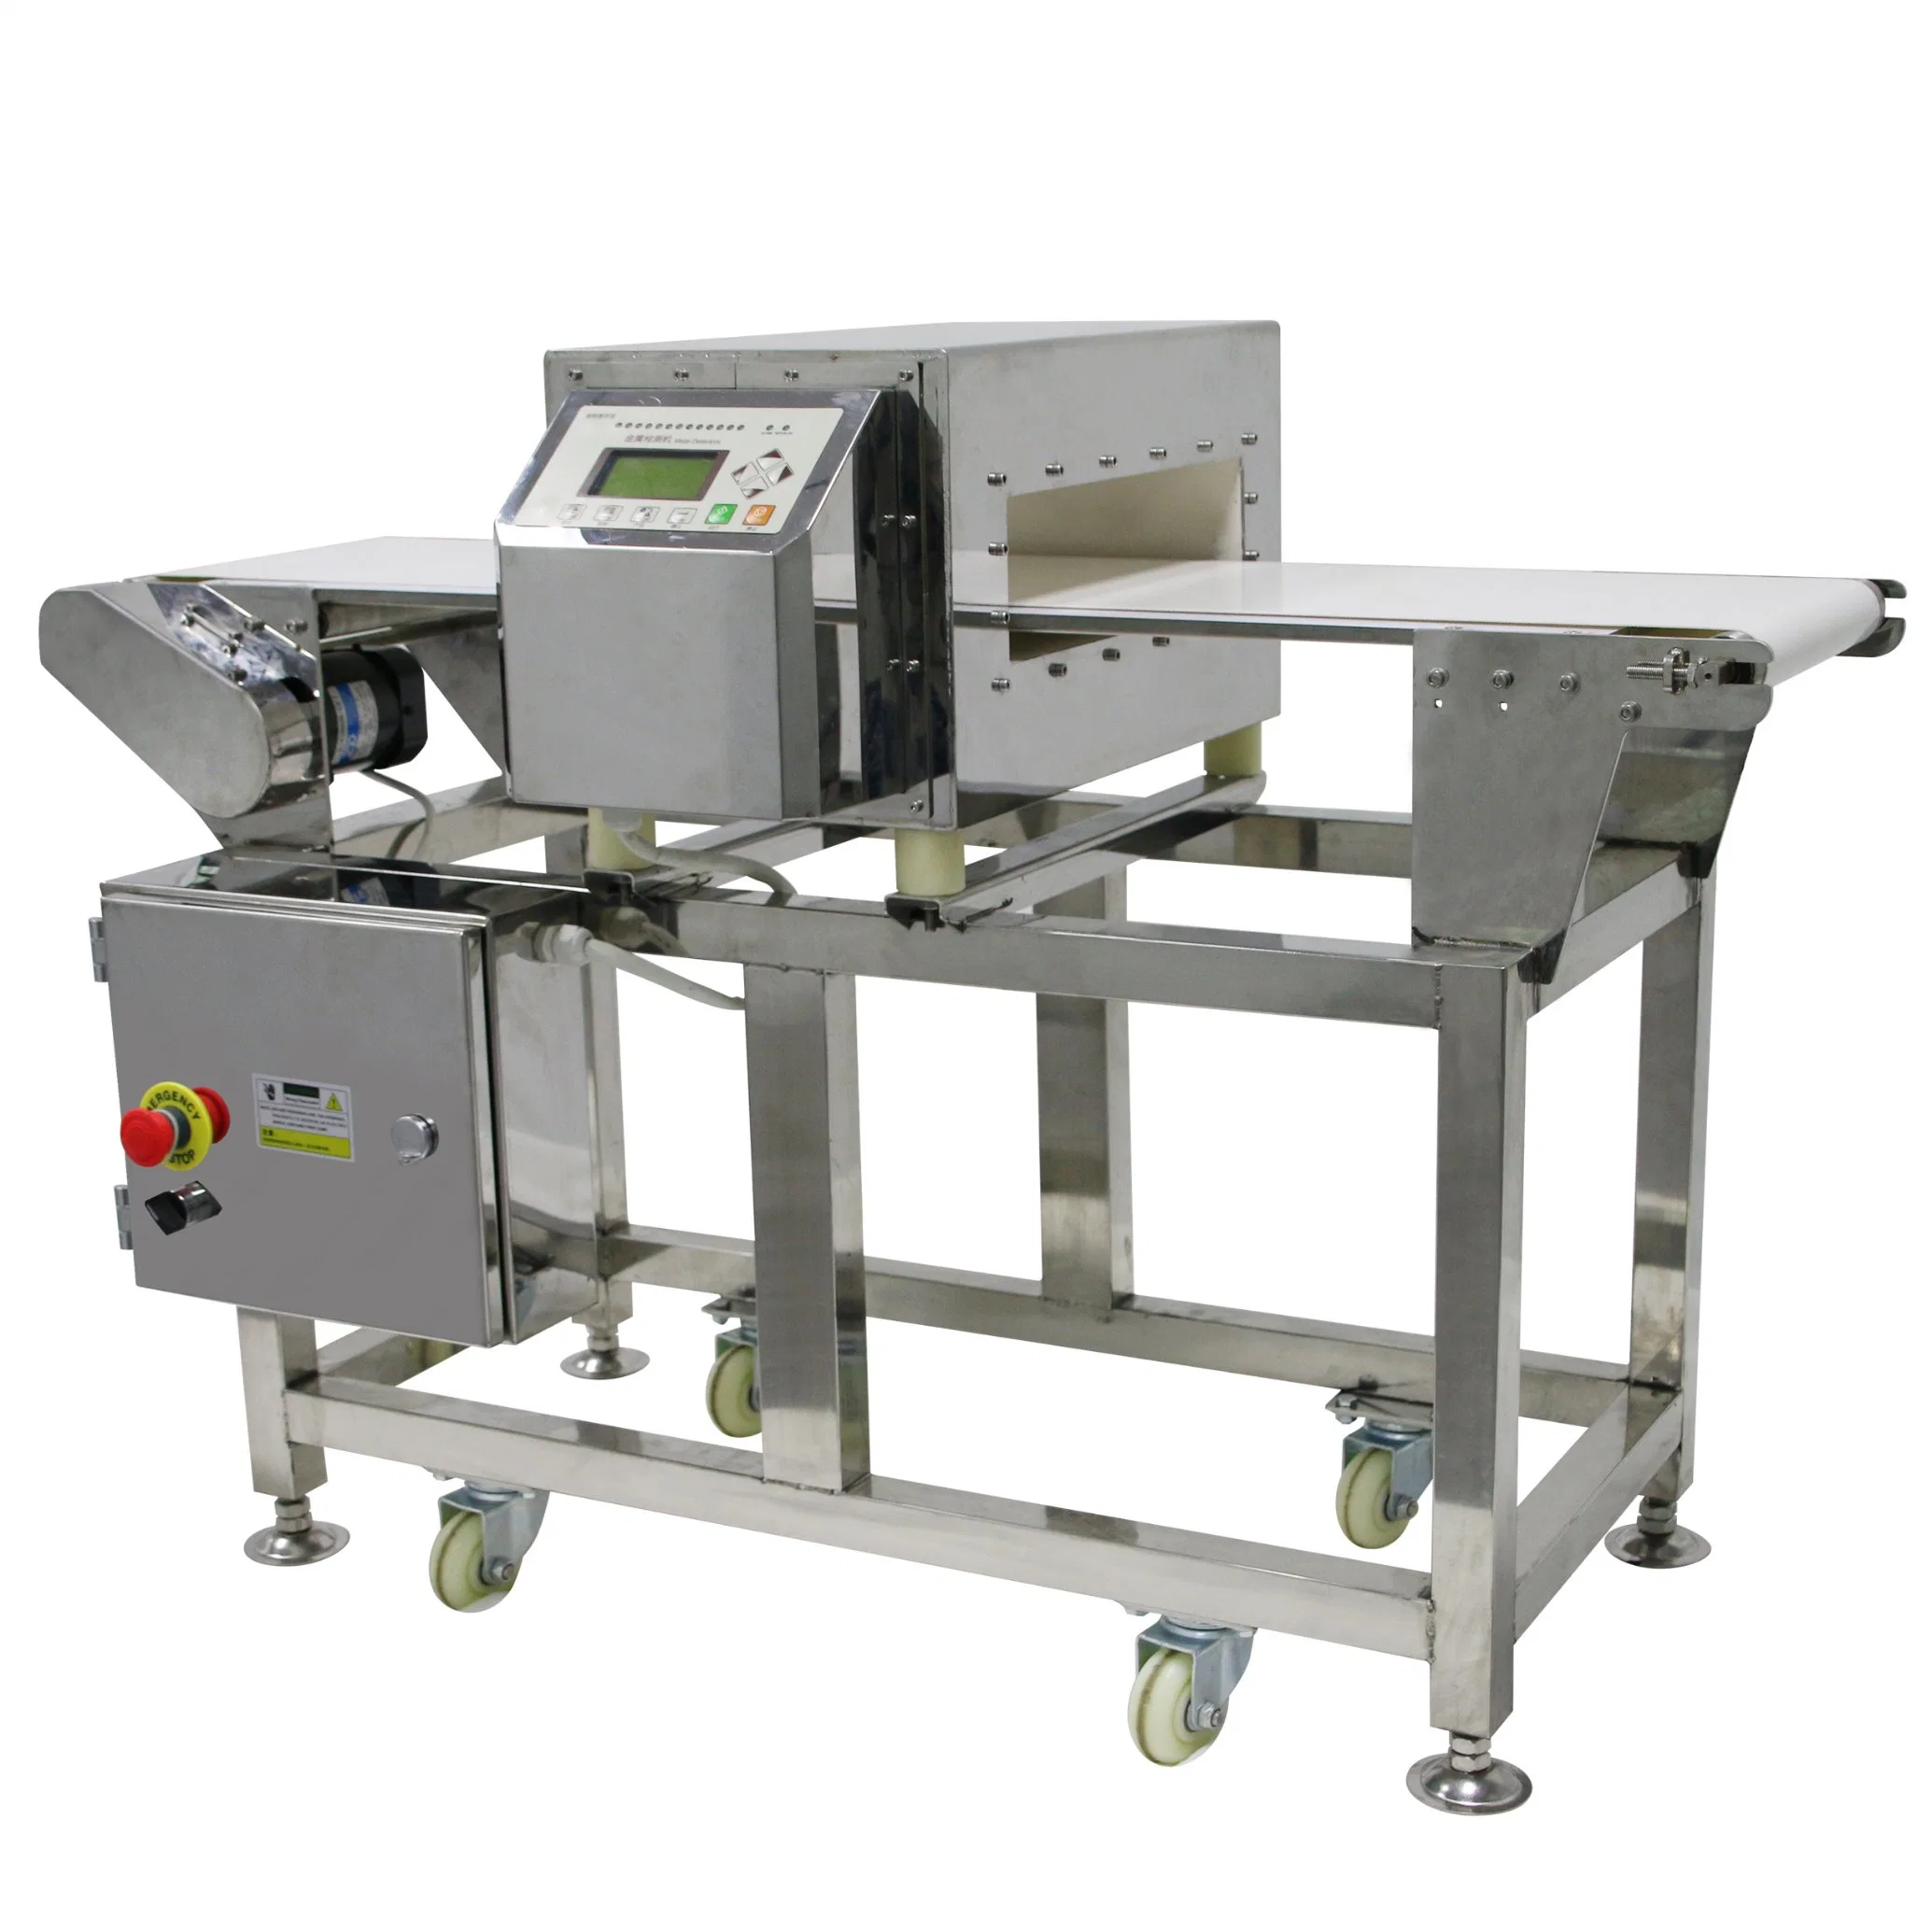 Automatic Metal Detector for Food Processing Industry